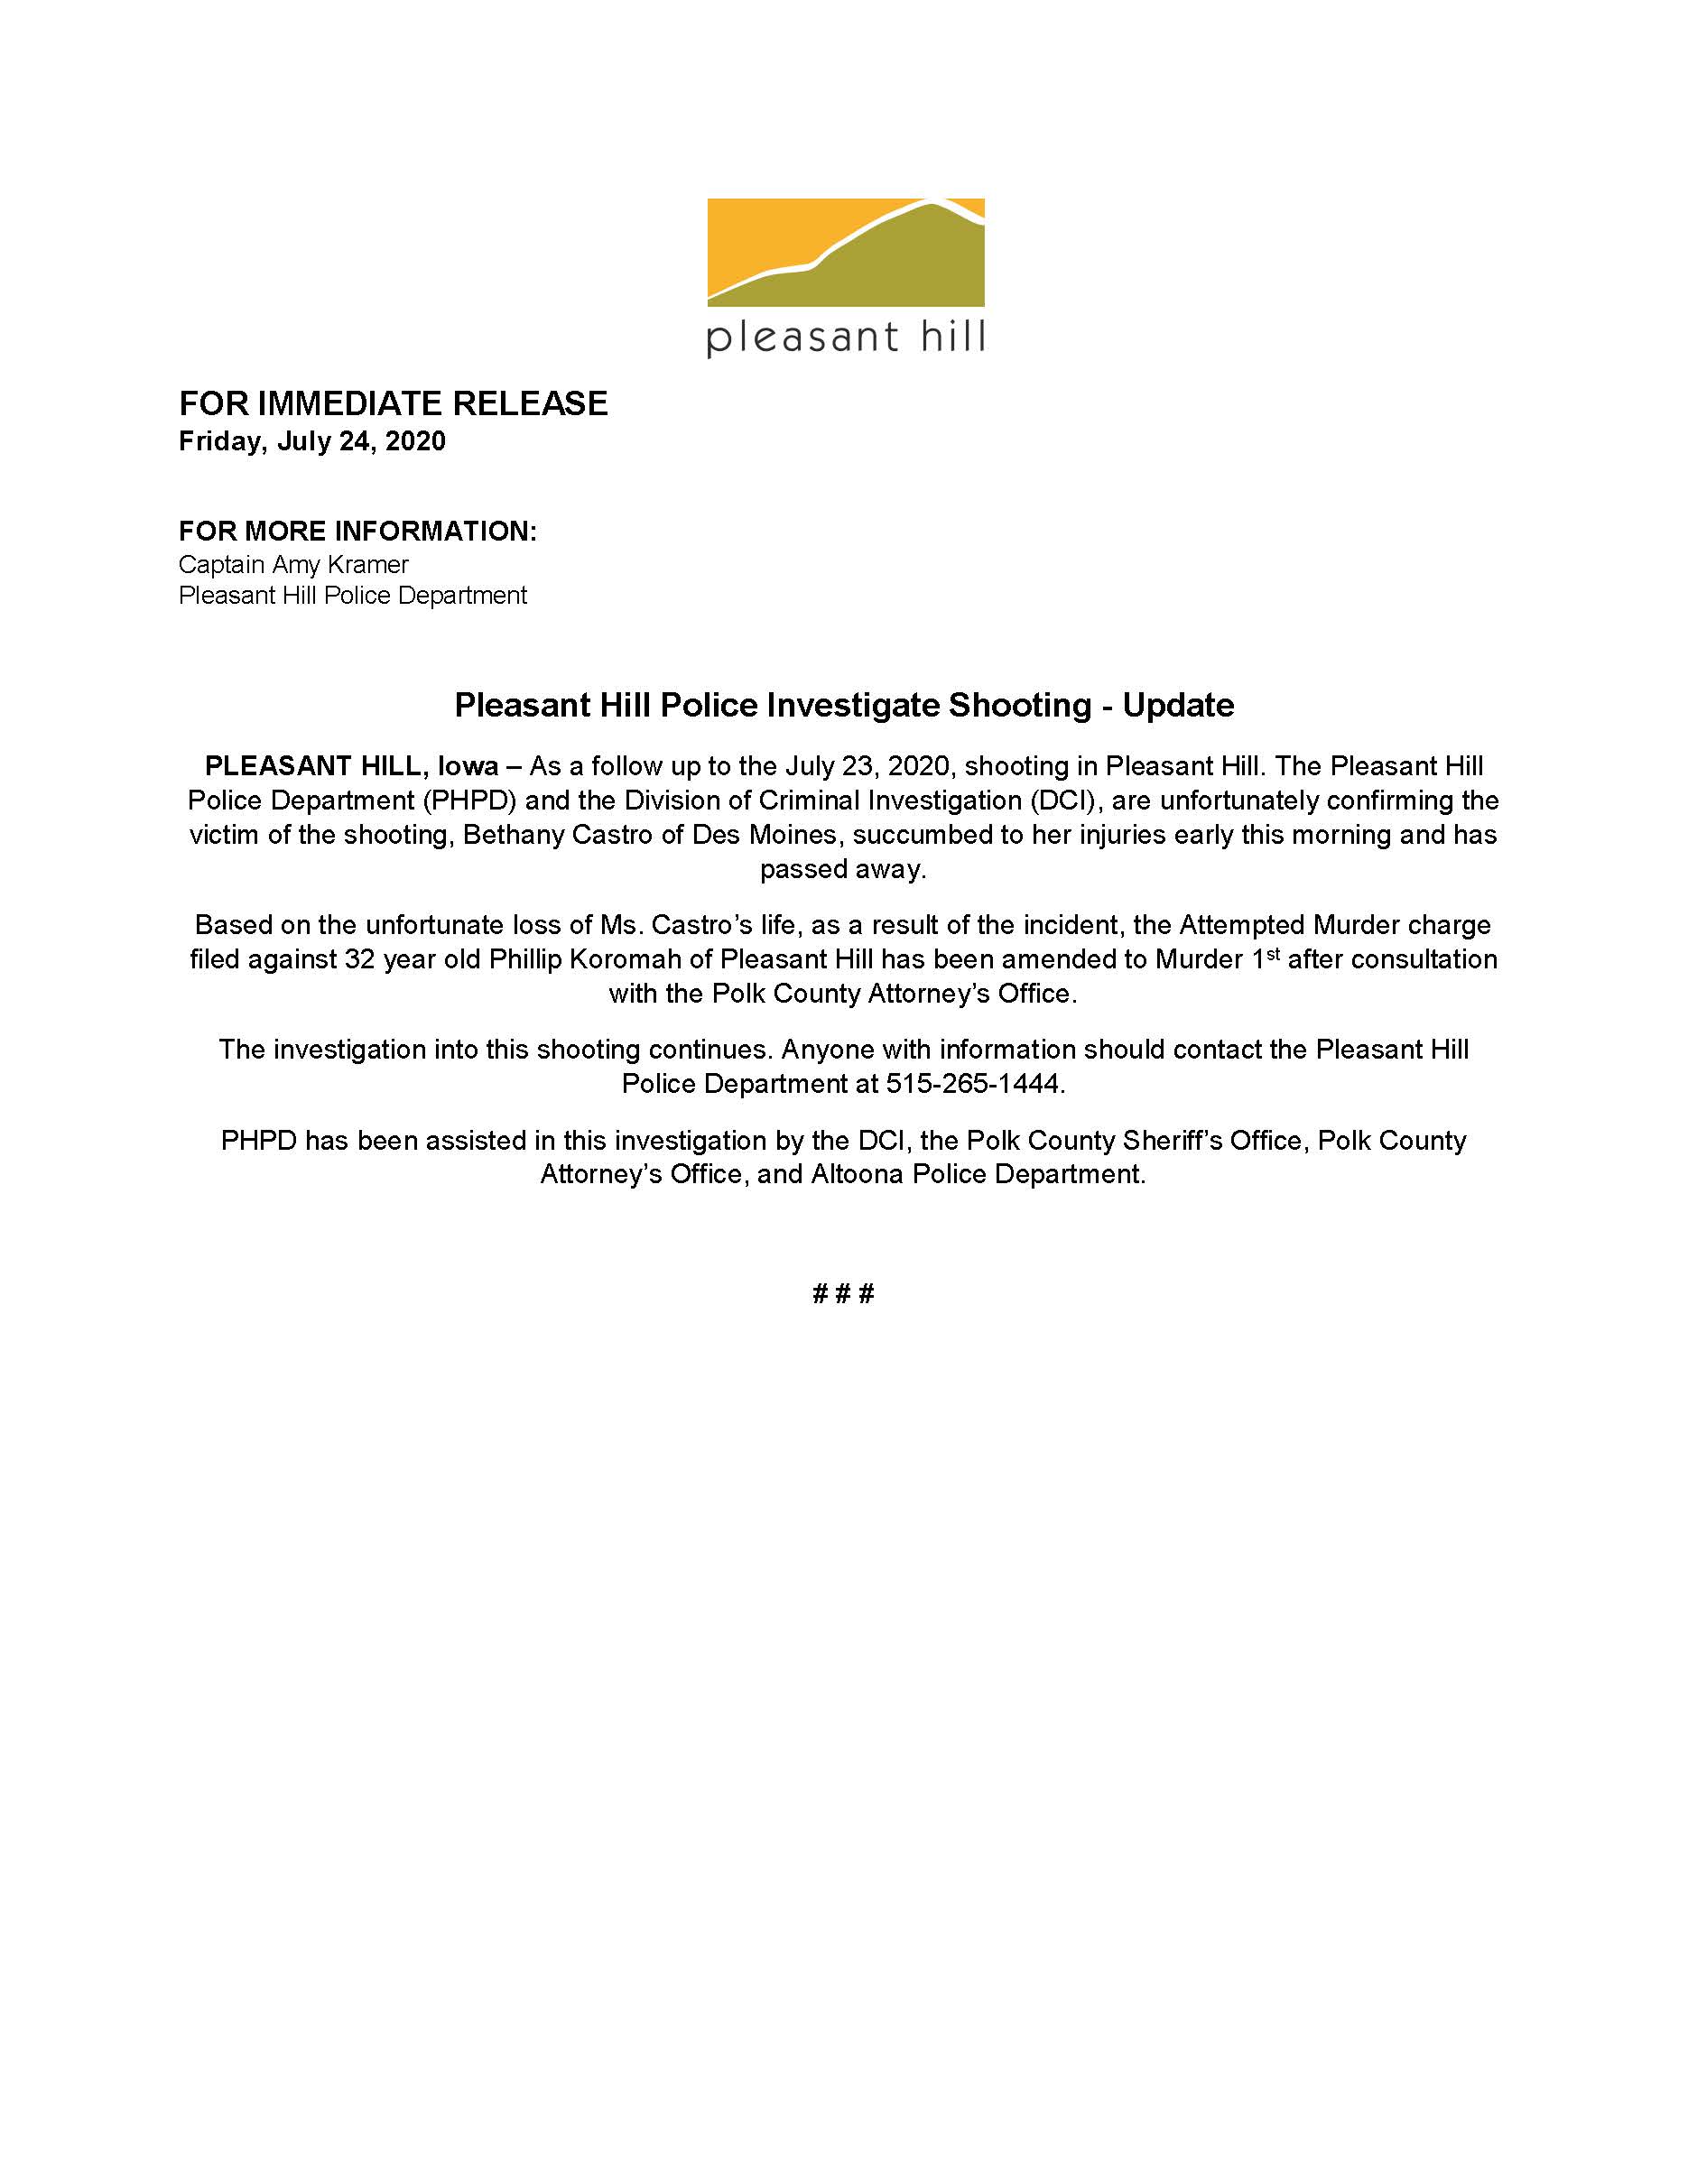 Link to Pleasant Hill Police Department press release. 